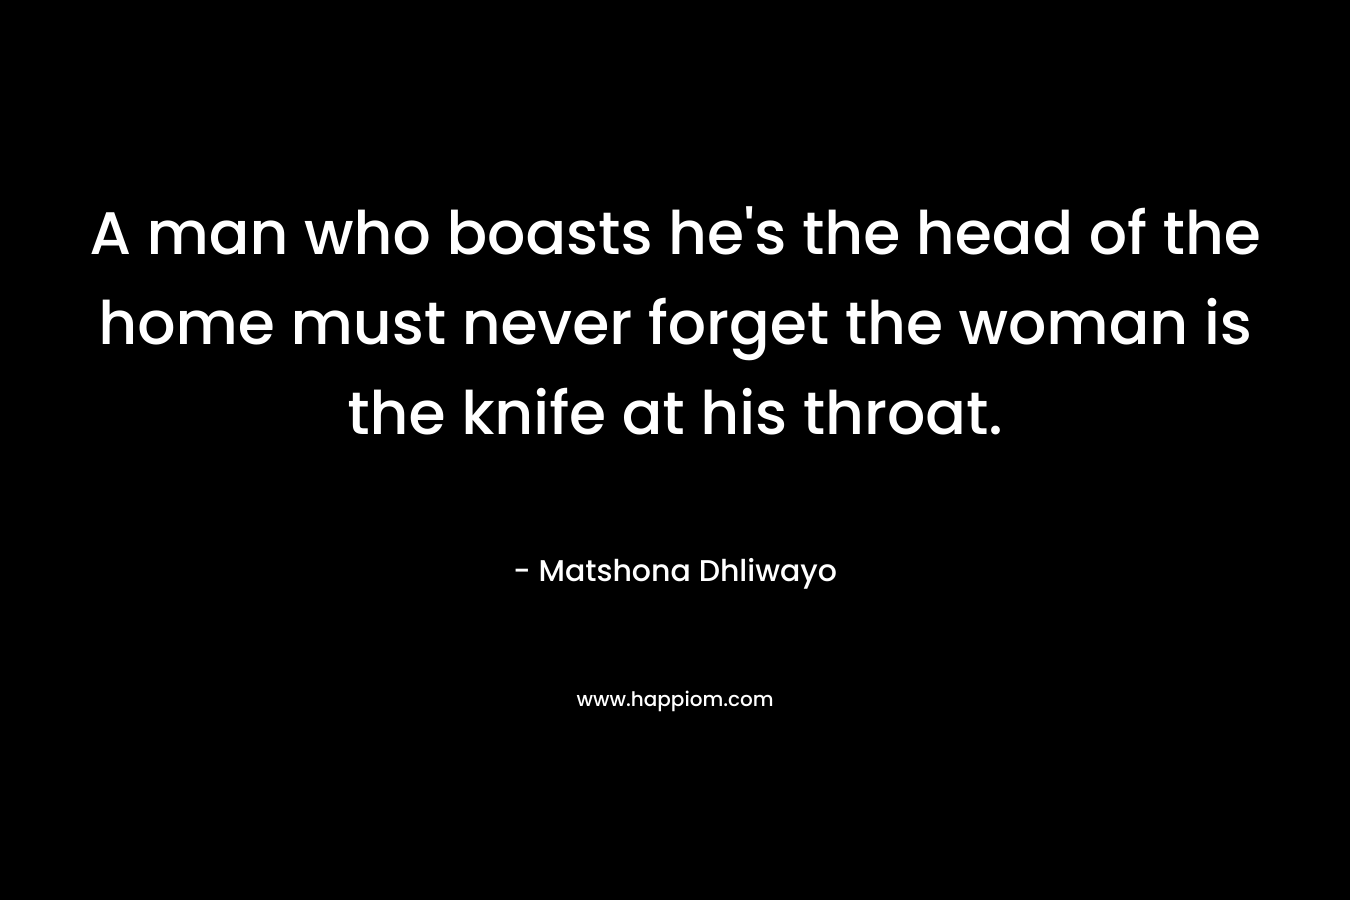 A man who boasts he’s the head of the home must never forget the woman is the knife at his throat. – Matshona Dhliwayo